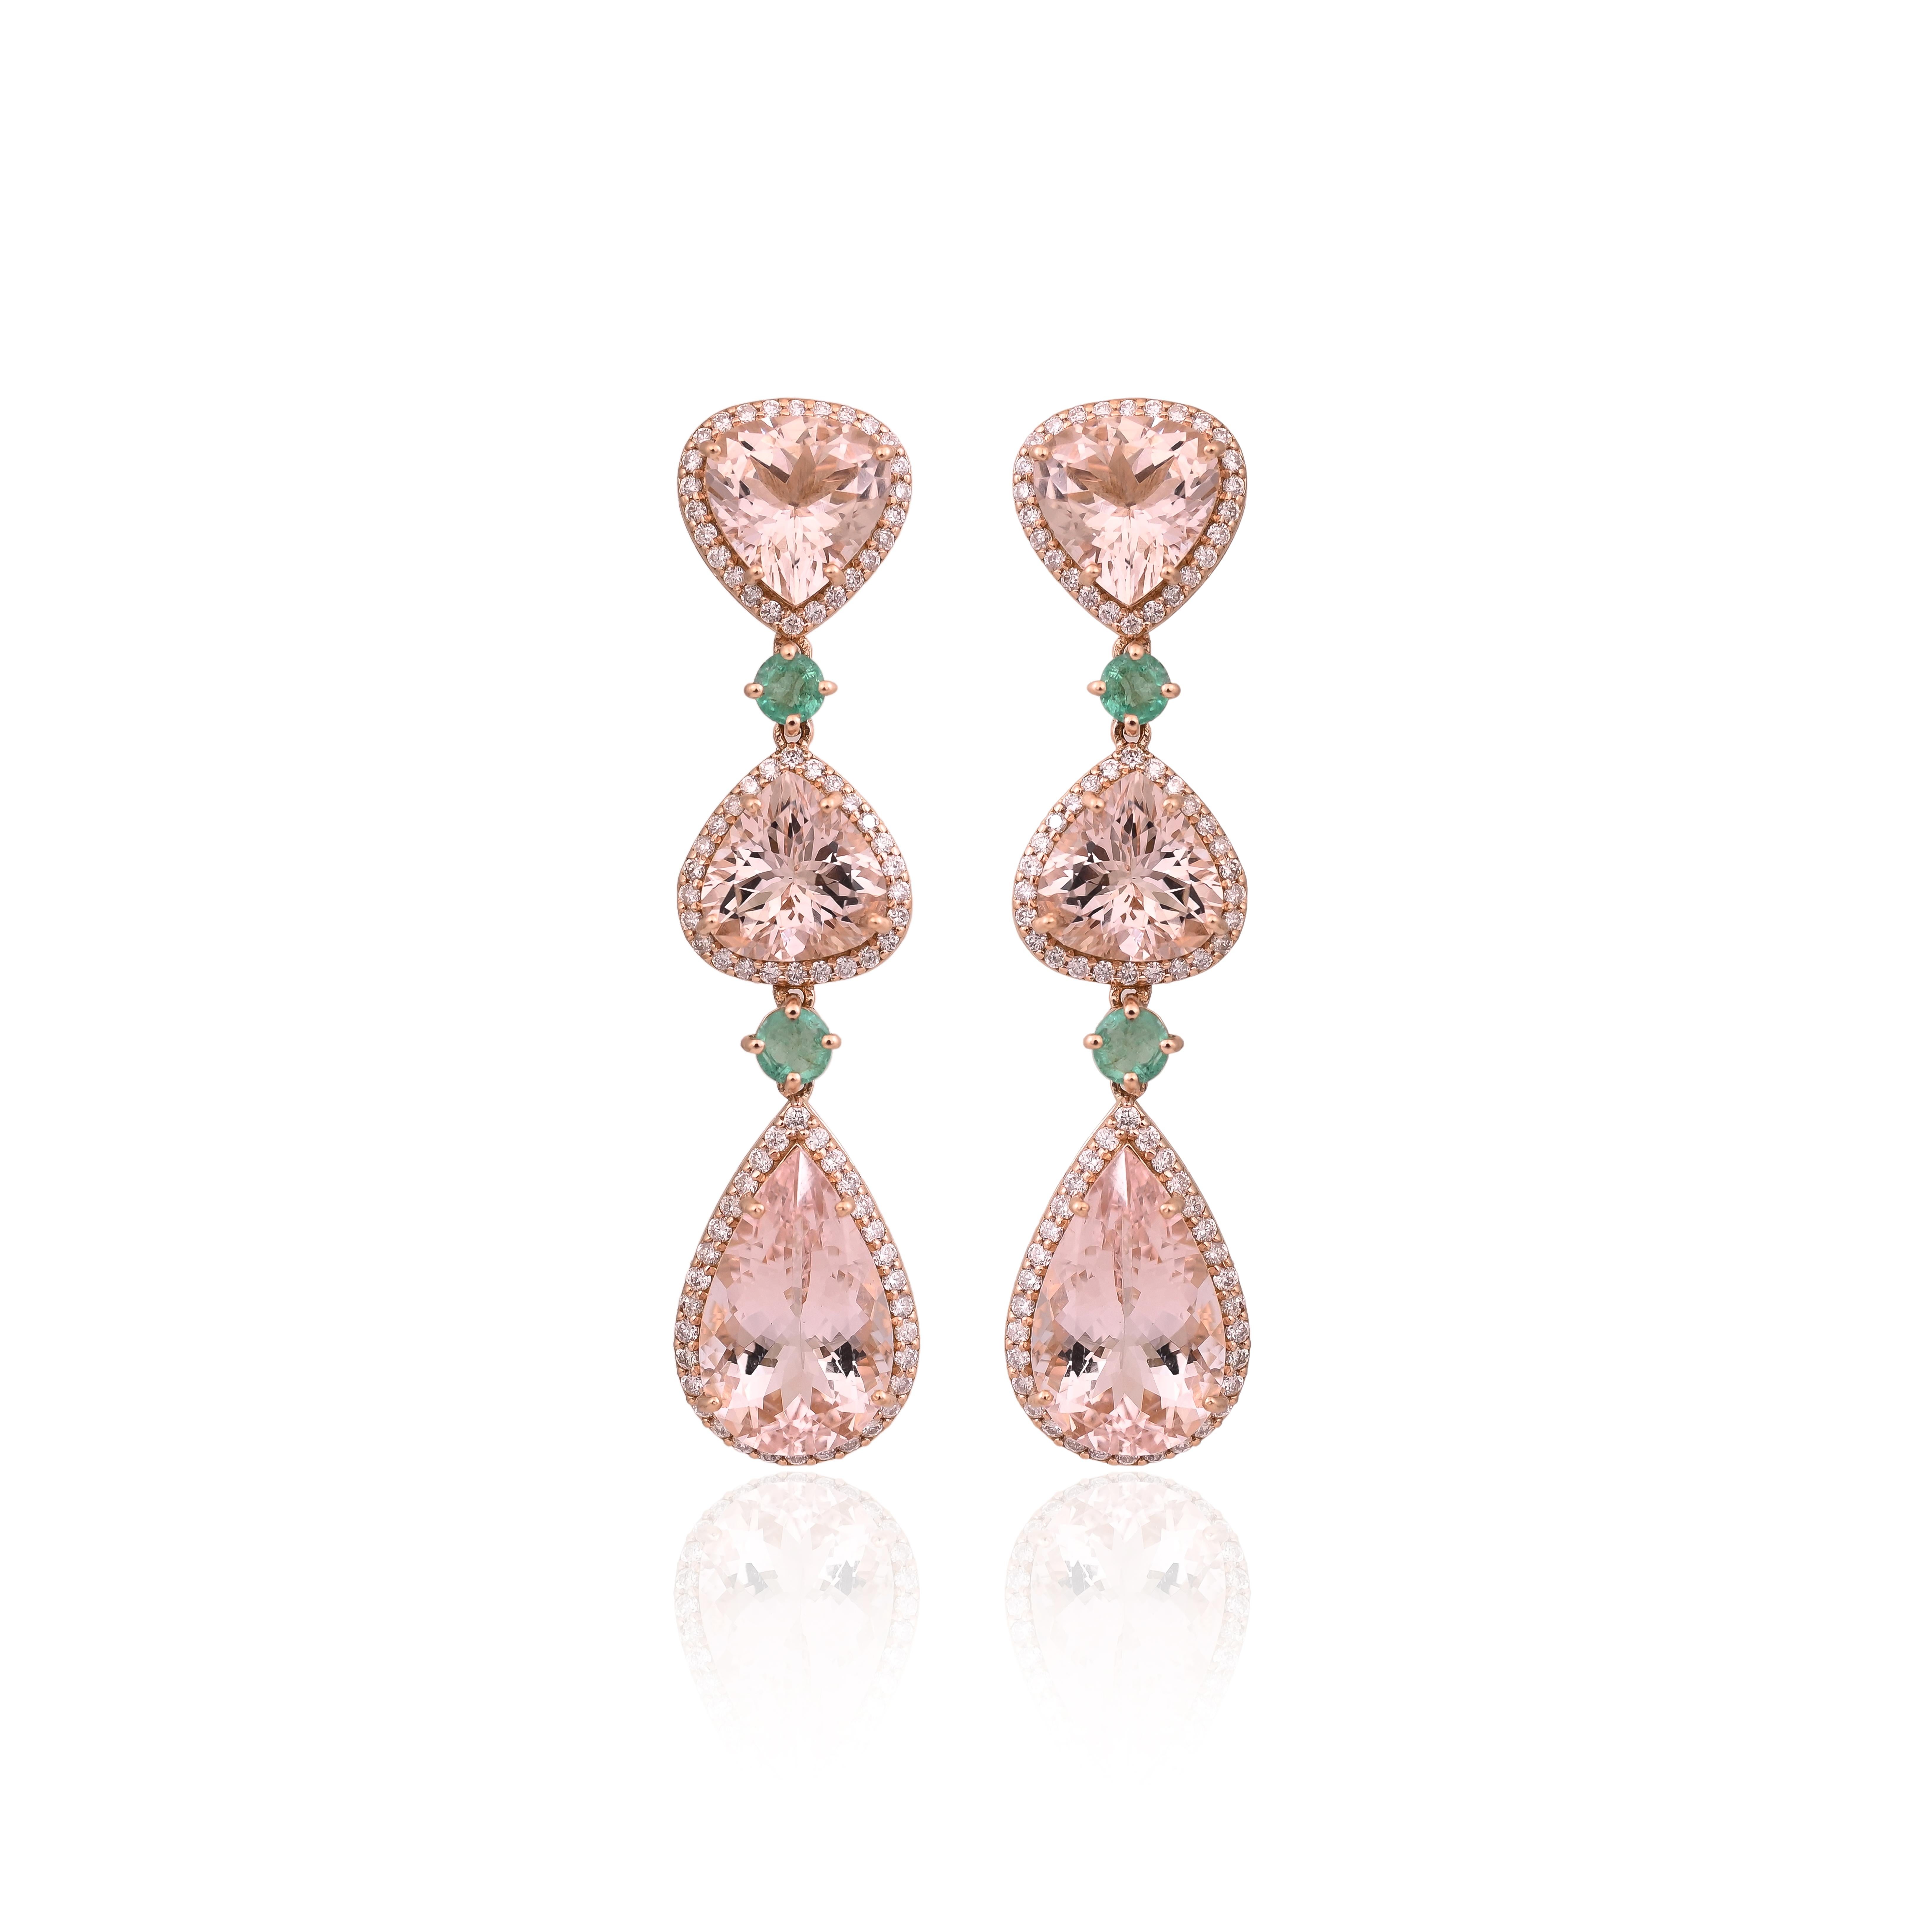 A very gorgeous and beautiful, Morganite & Emerald Chandelier Earrings set in 18K Rose Gold & Diamonds. The weight of the Morganites is 25.82 carats. The weight of the Emeralds is 1.18 carats. The Emeralds are completely natural, without any